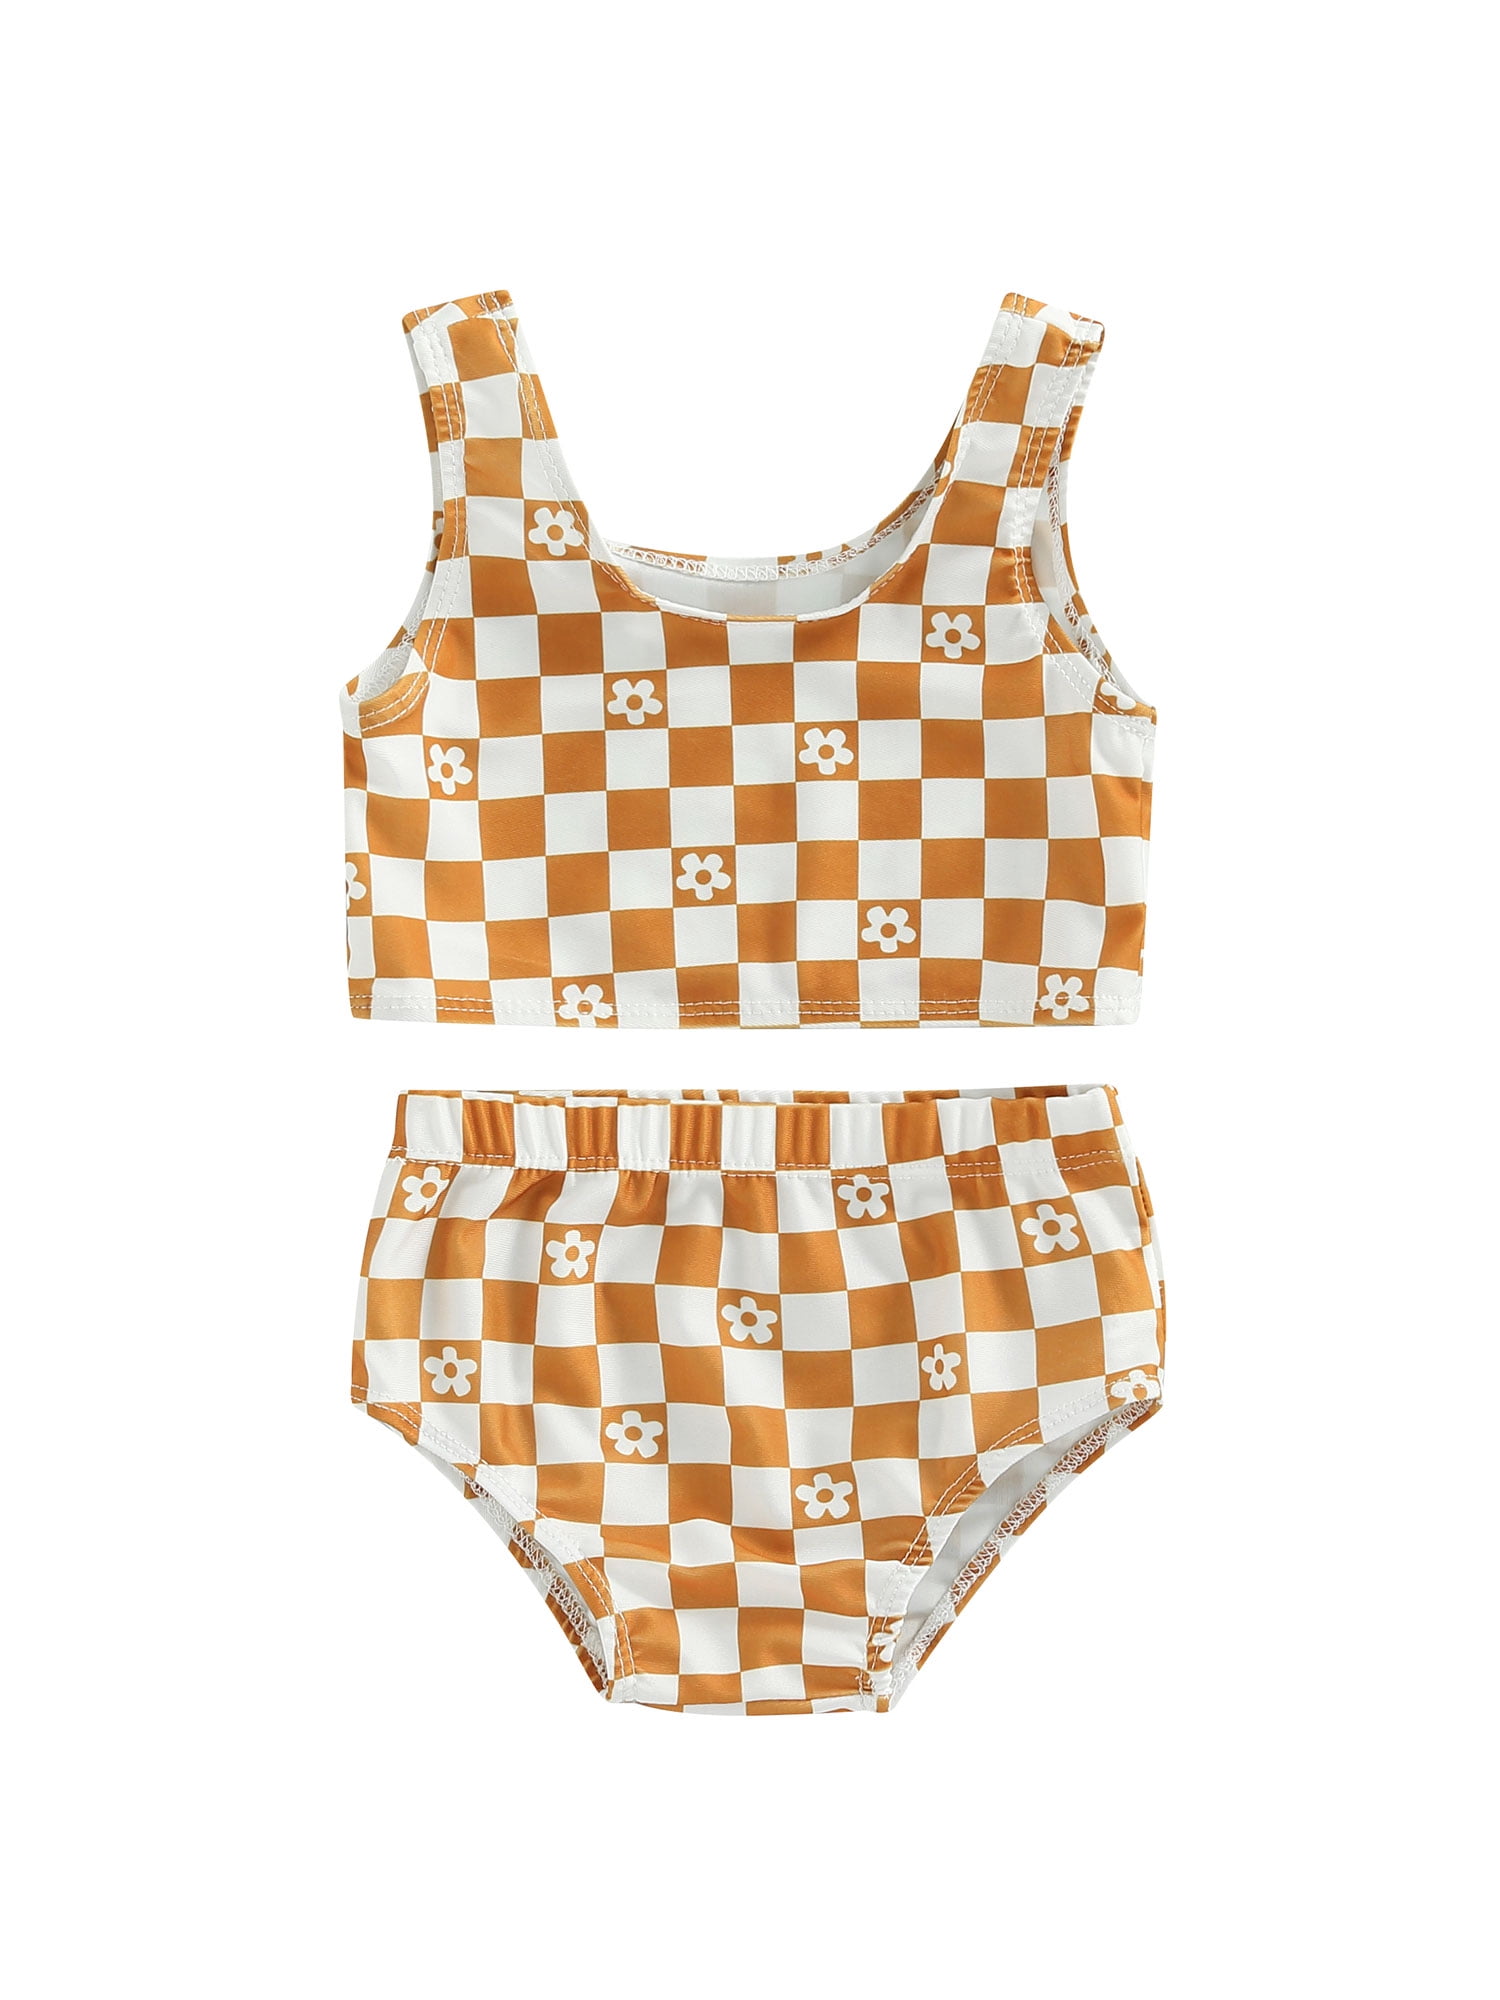 Bagilaanoe Toddler Baby Girl Two Piece Swimsuit Set Print / Plaid Pattern Bathing Suit Sleeveless Tank Tops Shorts for 9 Months to 4 Years, Infant